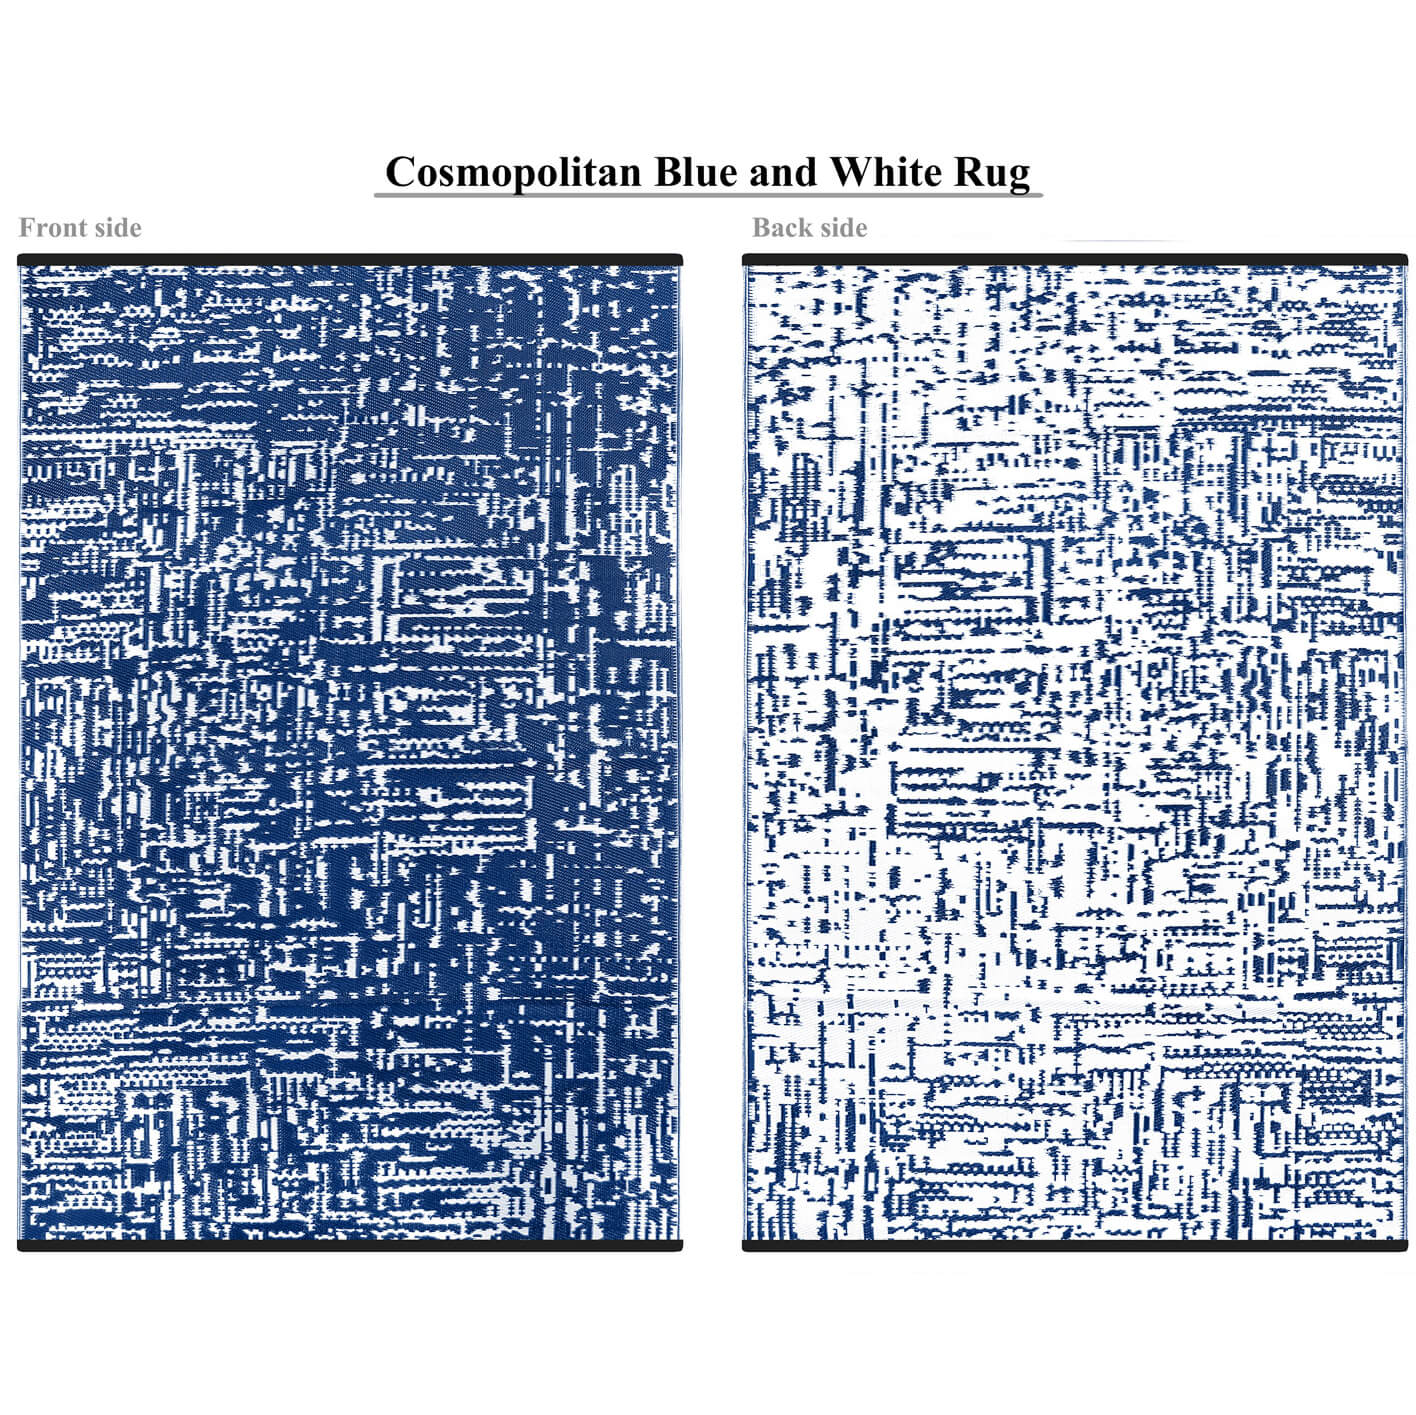 Cosmopolitan Outdoor Recycled Plastic Rug (True Blue/White)